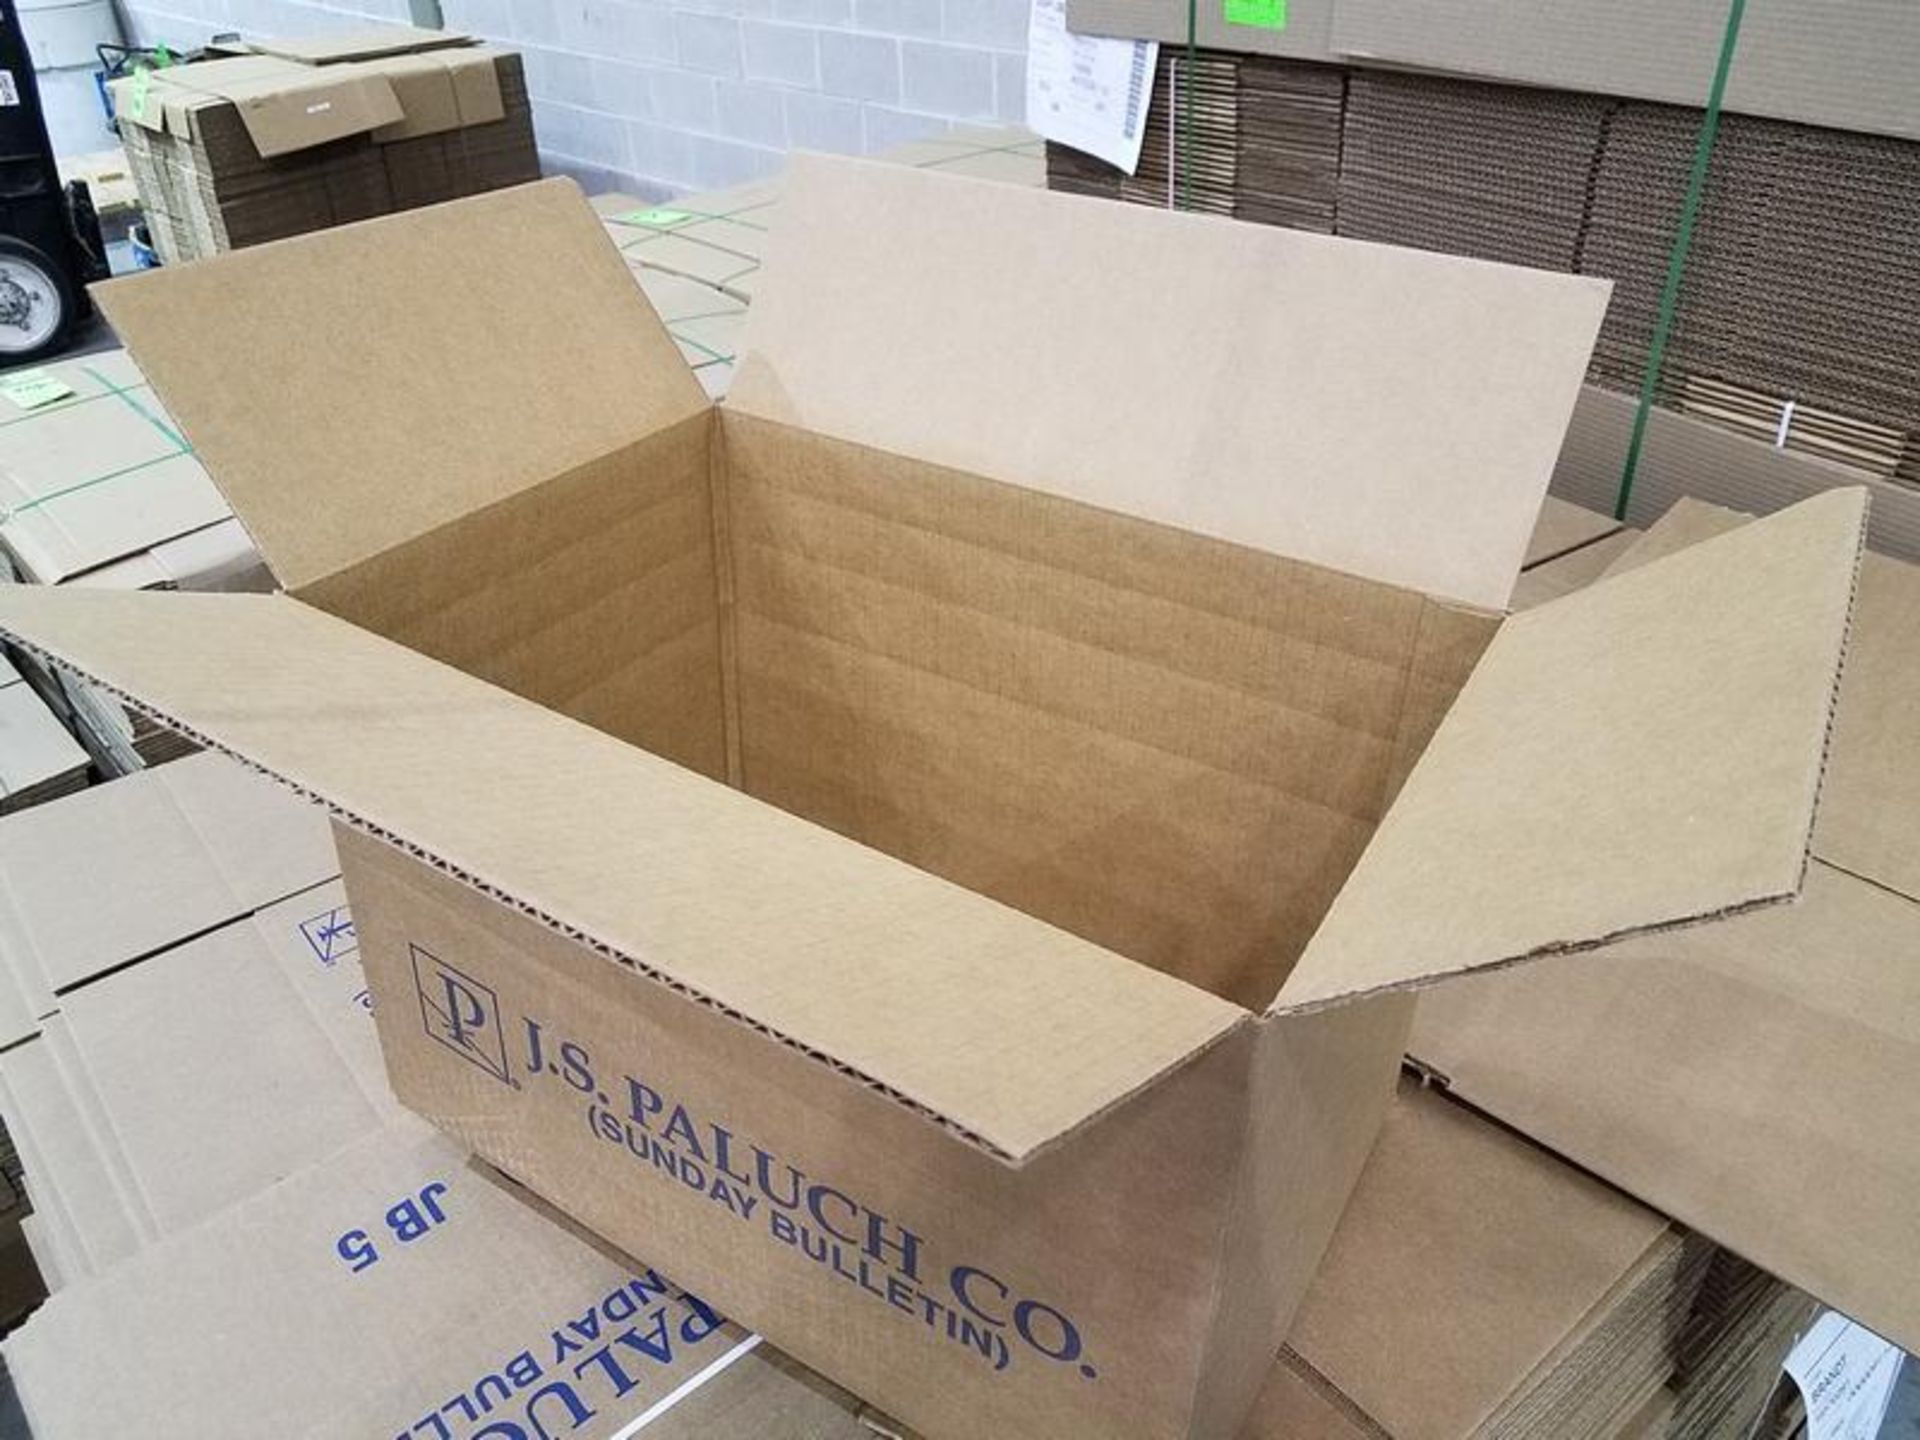 Lot JSP-JB5 Corrugated Boxes, 17.25" x 11.25" x 7.5" Approx. - Image 2 of 2